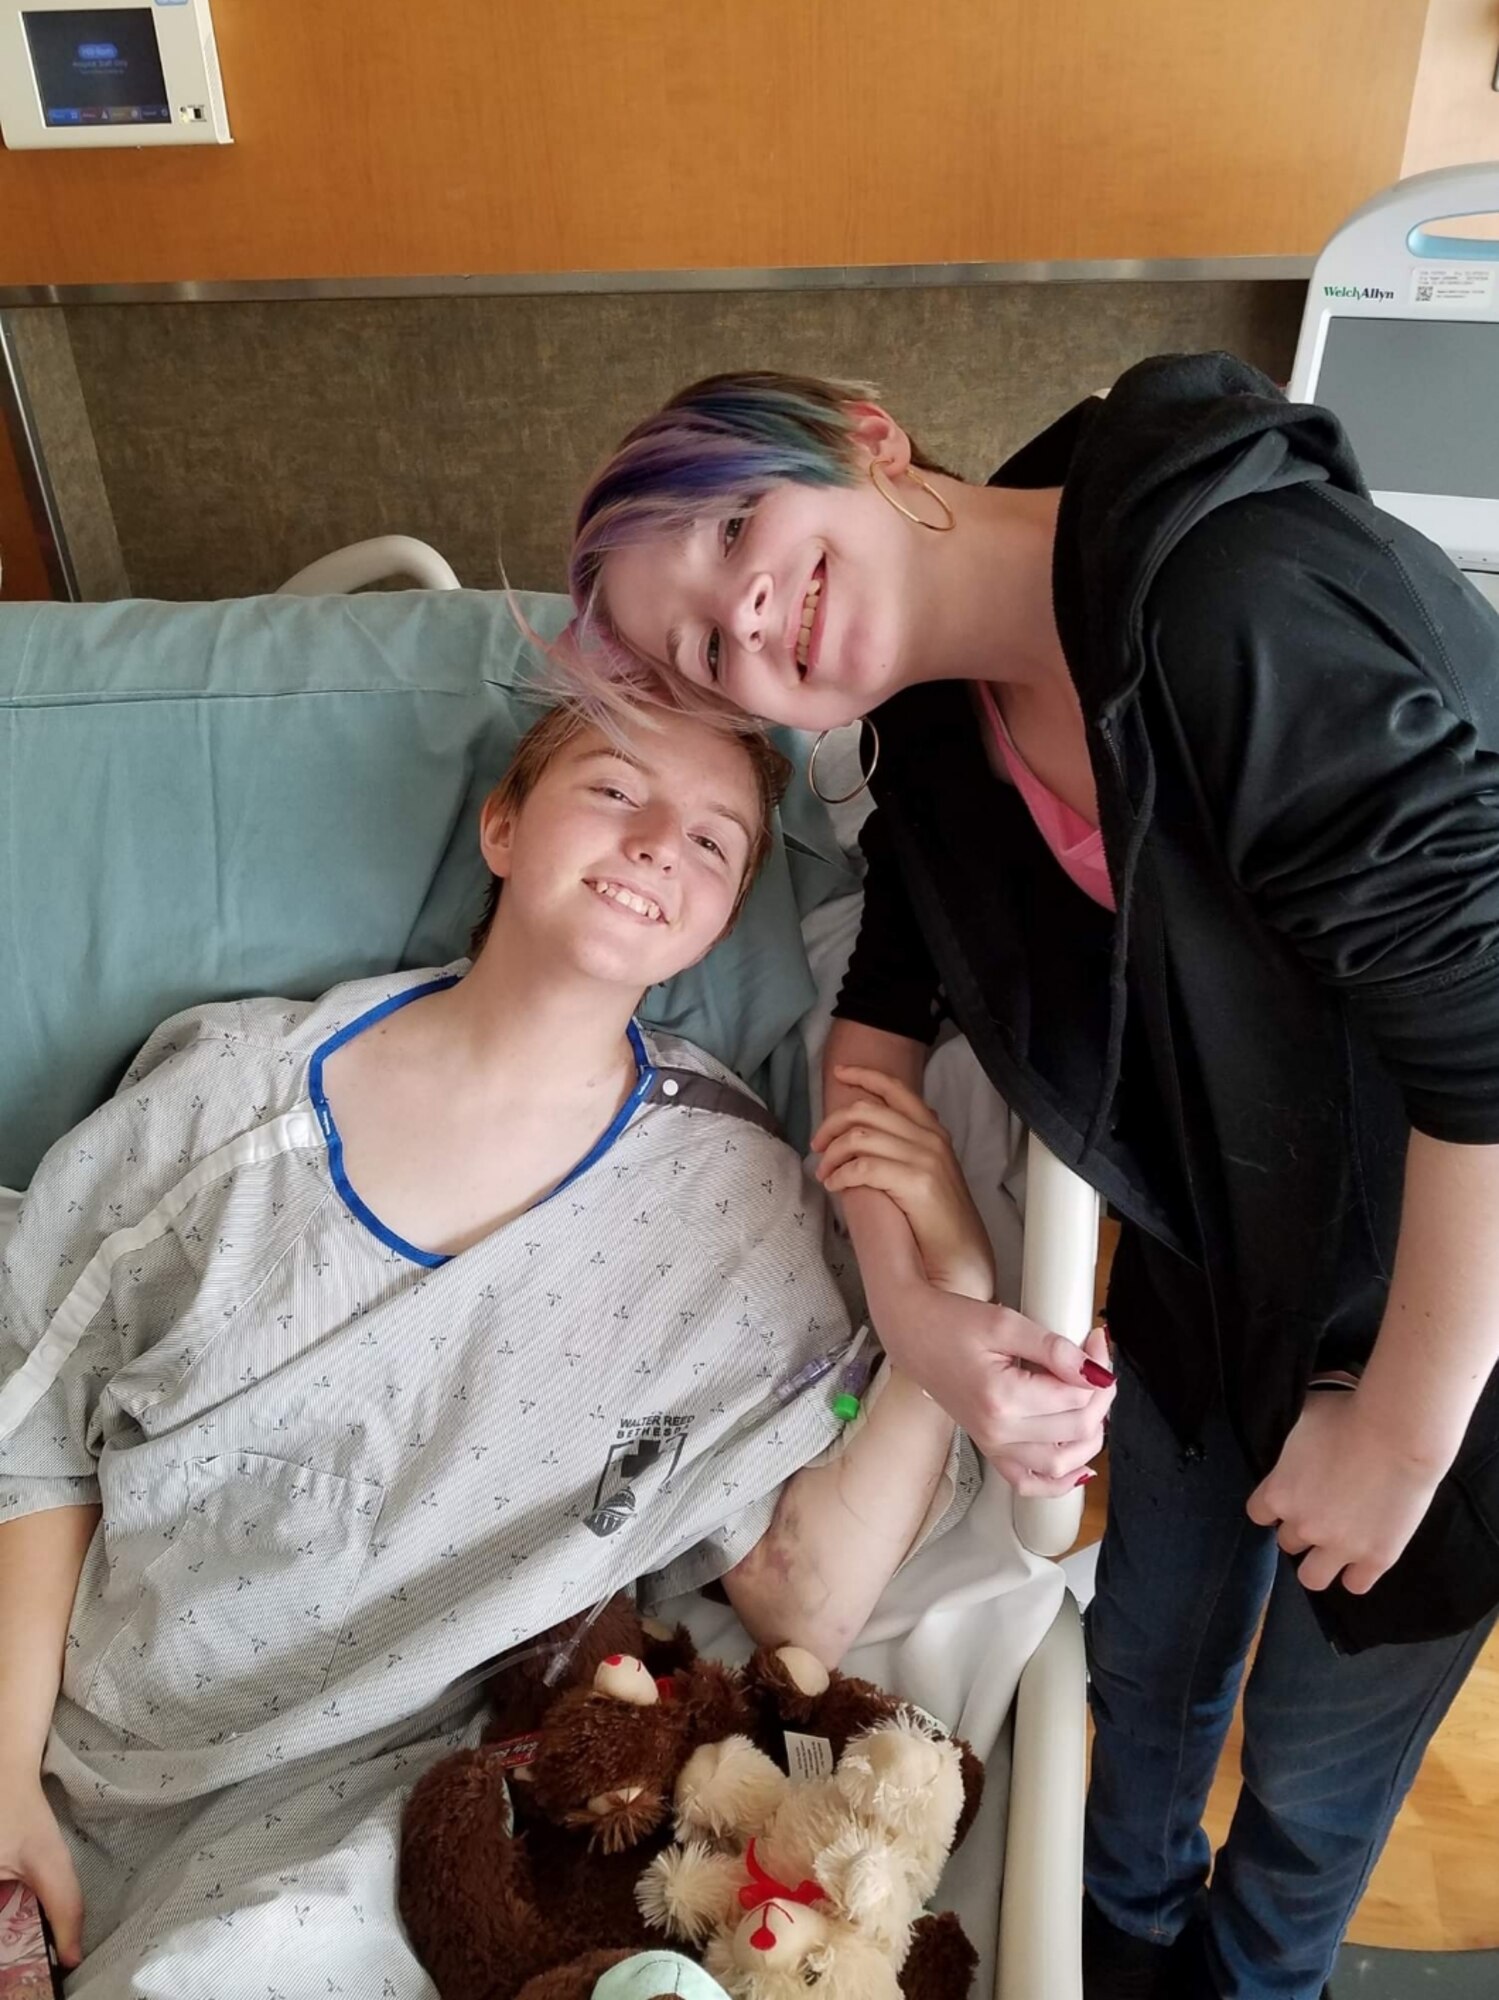 U.S. Air Force Airman 1st Class Constance Bratcher takes a photo with her cousin while in the hospital around May 2018.